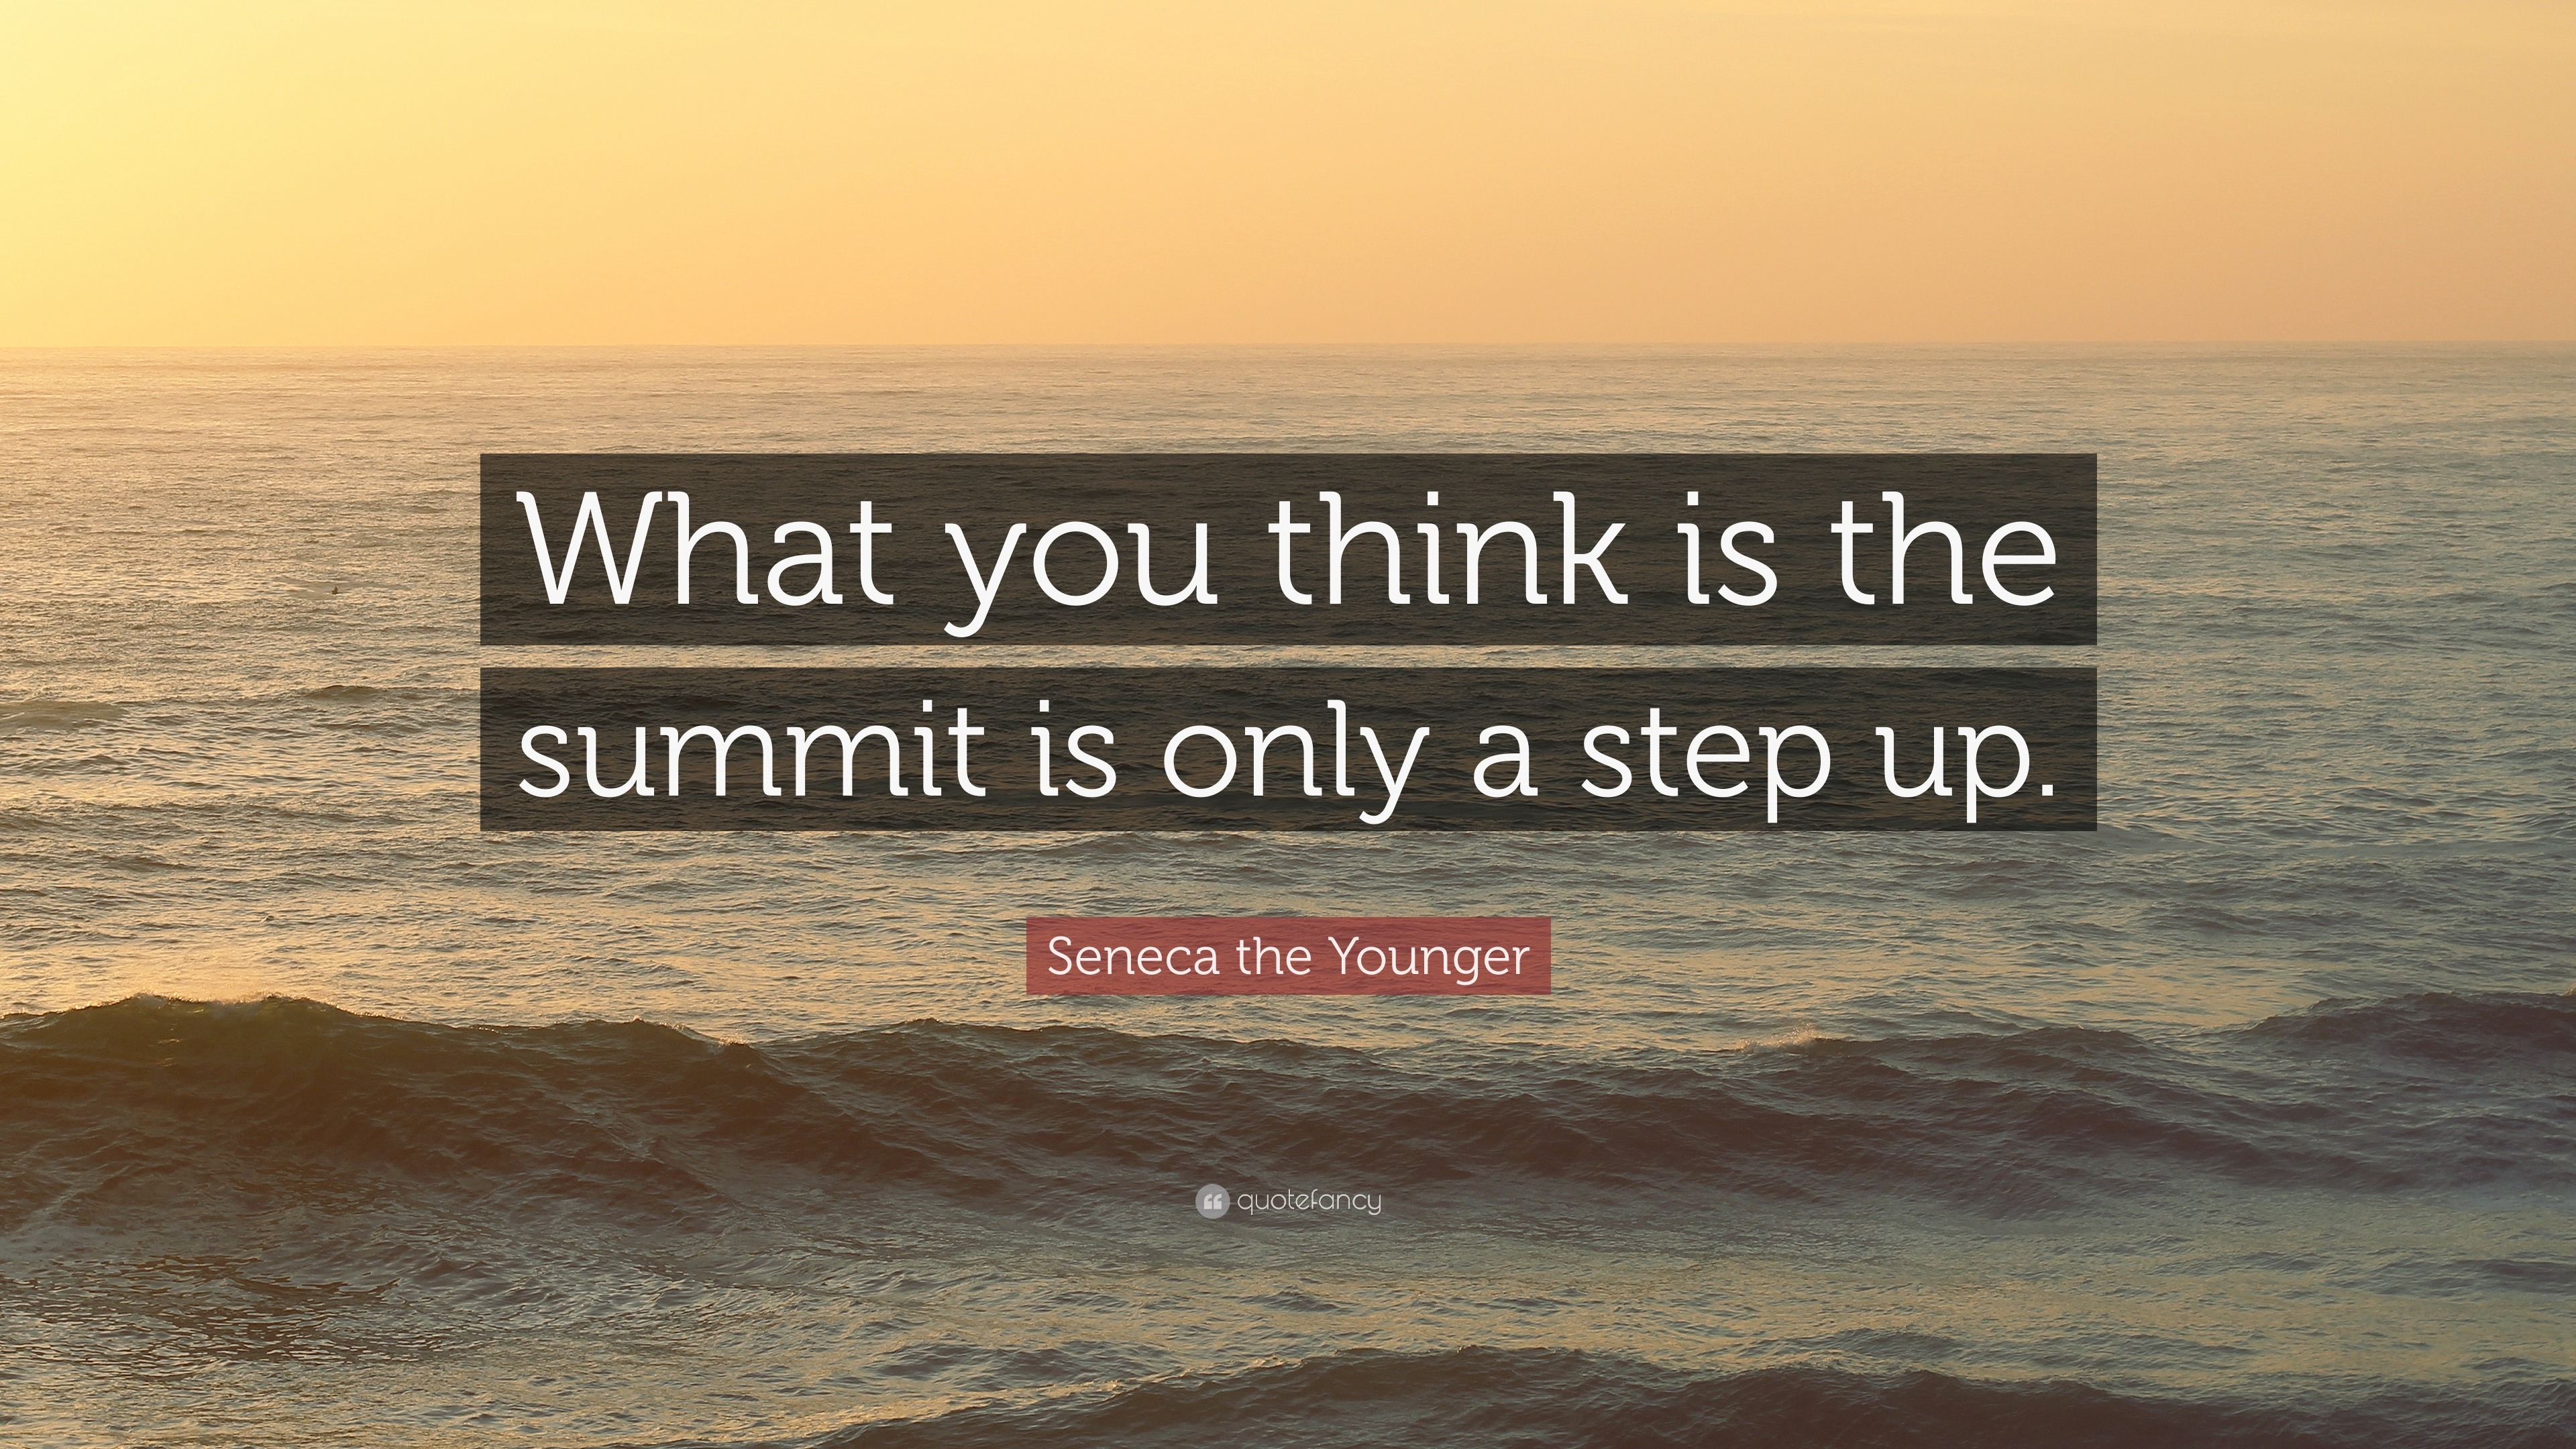 Seneca the Younger Quote: "What you think is the summit is only a step up." (10 wallpapers ...